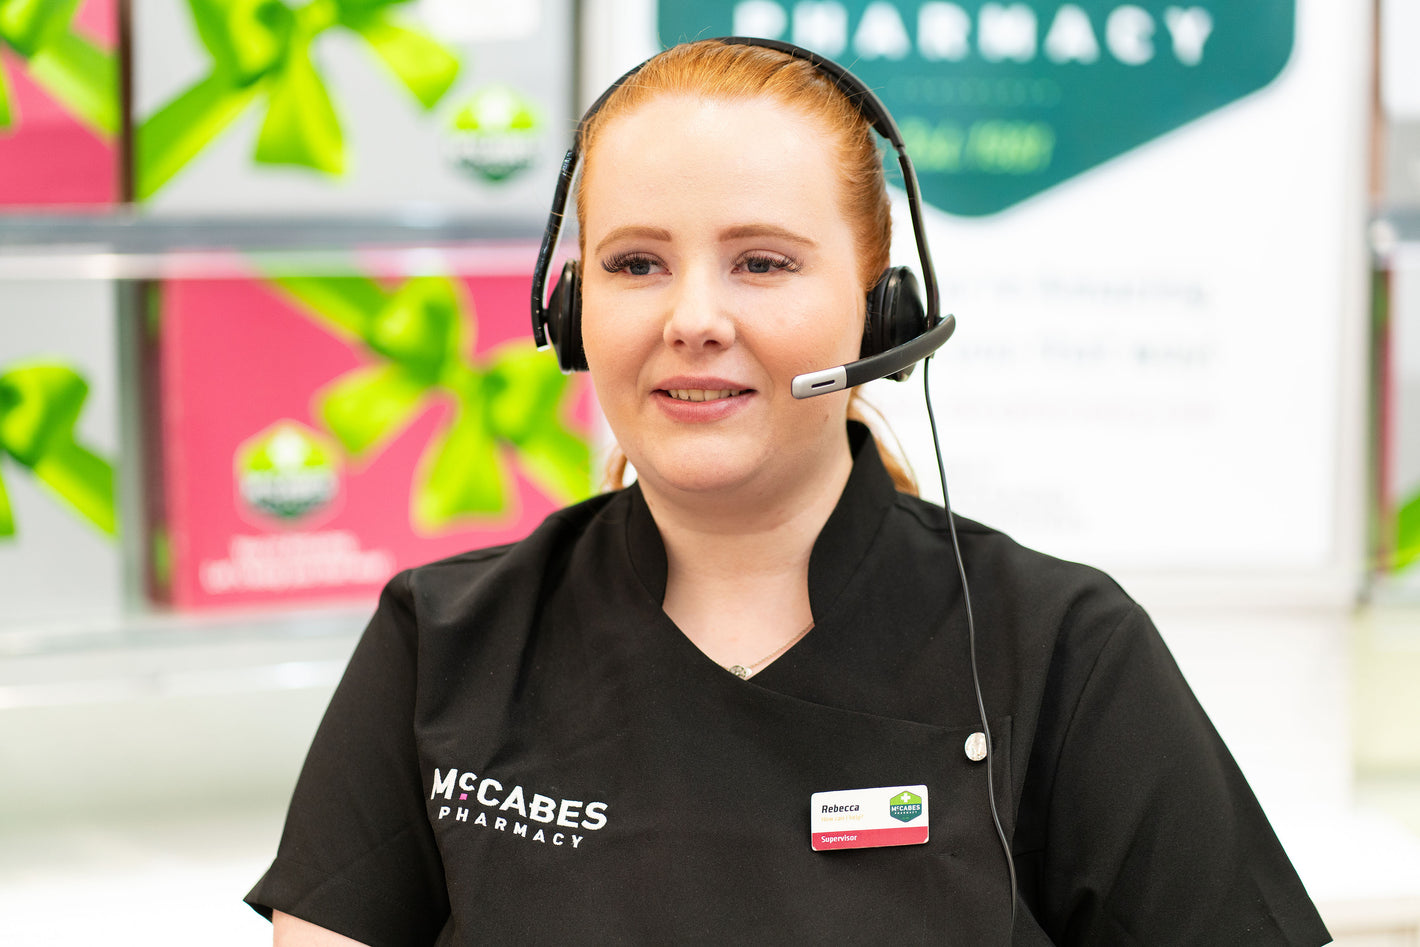 McCabes Pharmacy Customer Support